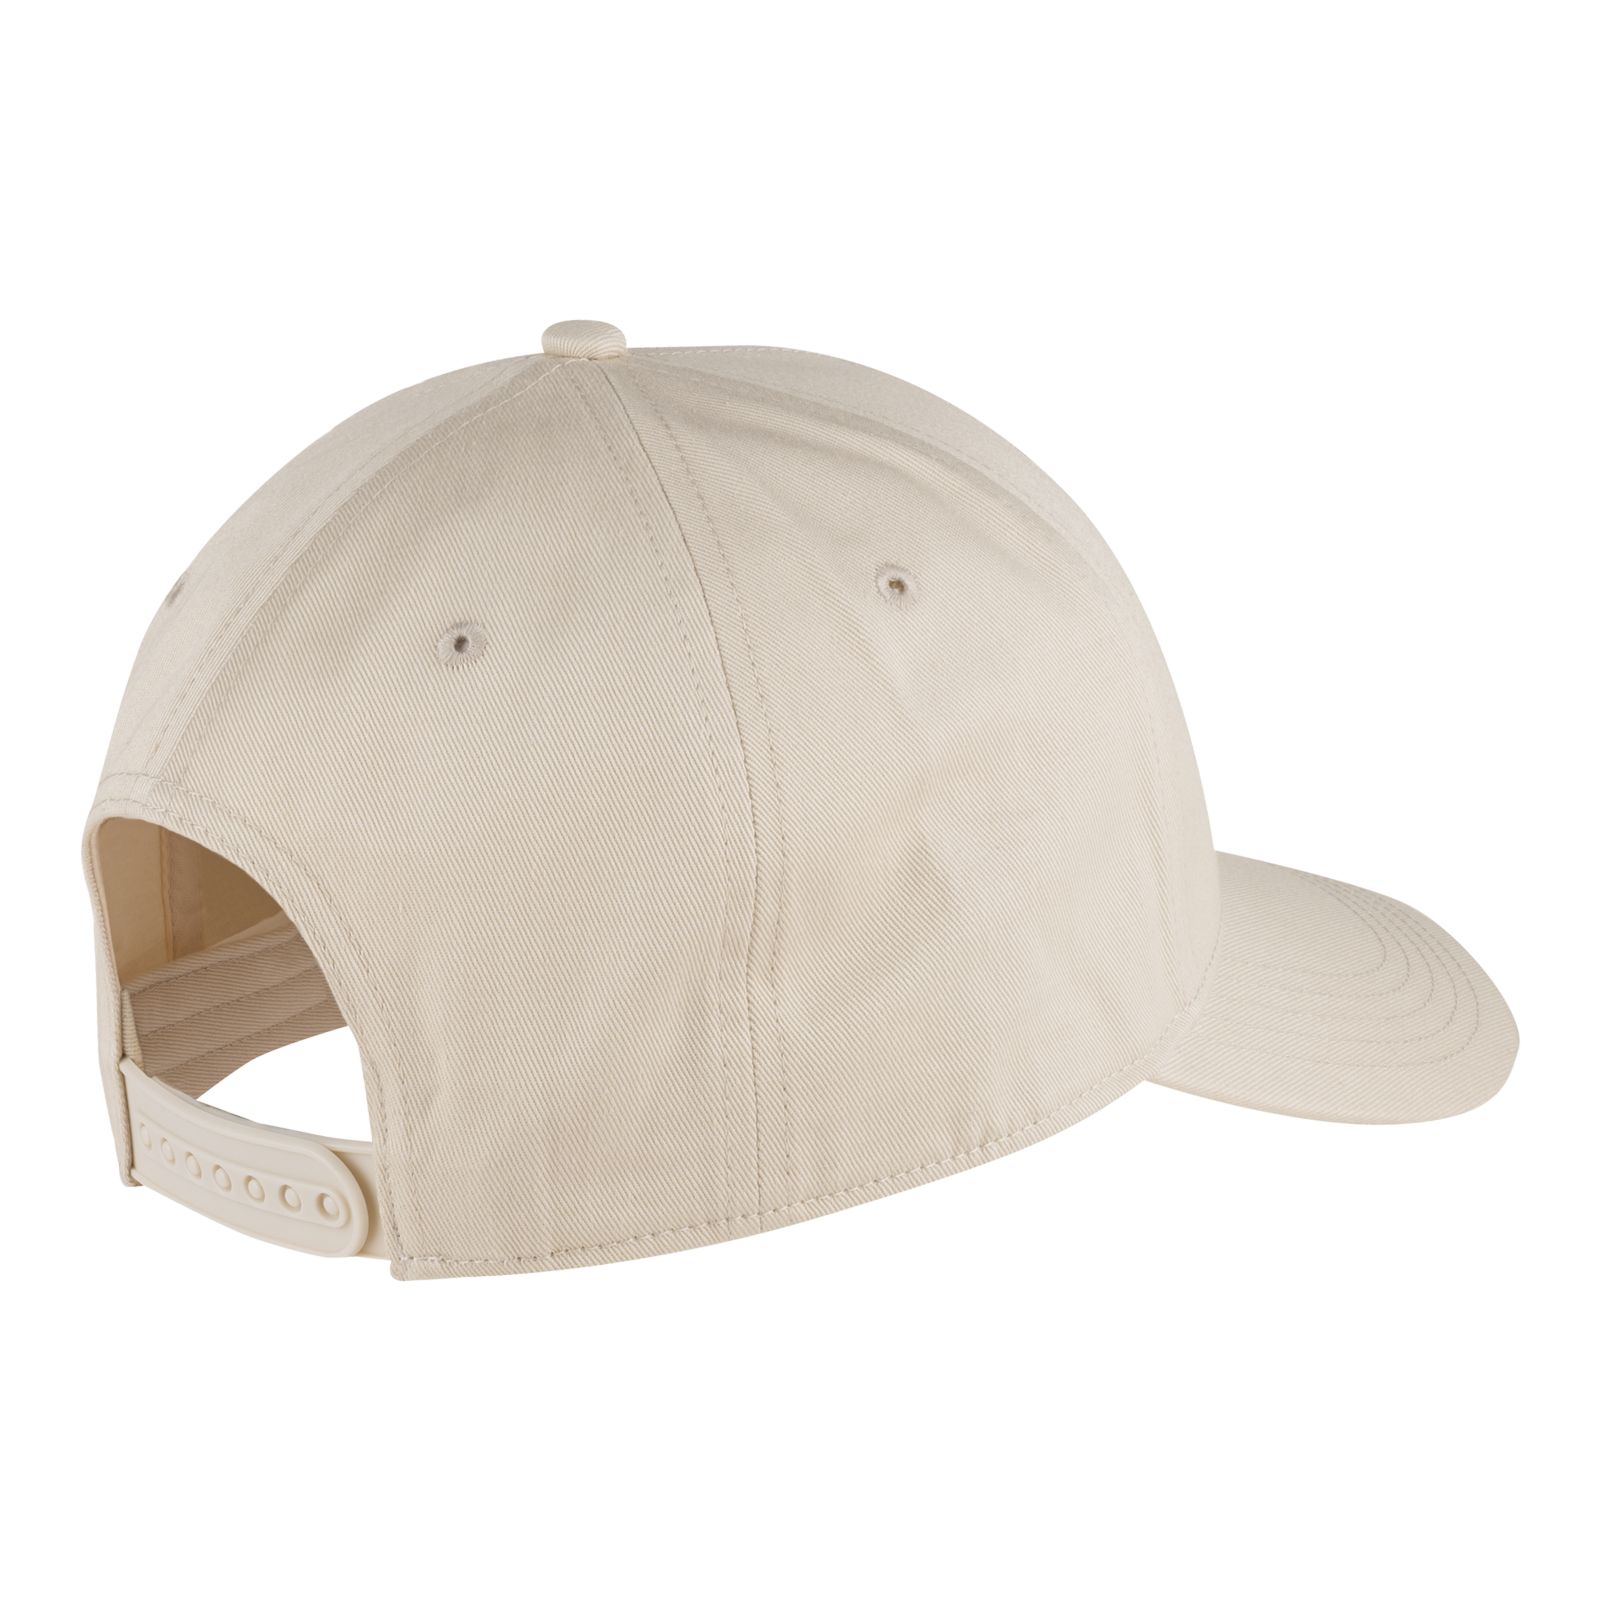 10-Pack Foam Beige Baseball Cap with Peaked Visor Core and Snapback Panel - Replacement Brim for Hard Hats and Liners